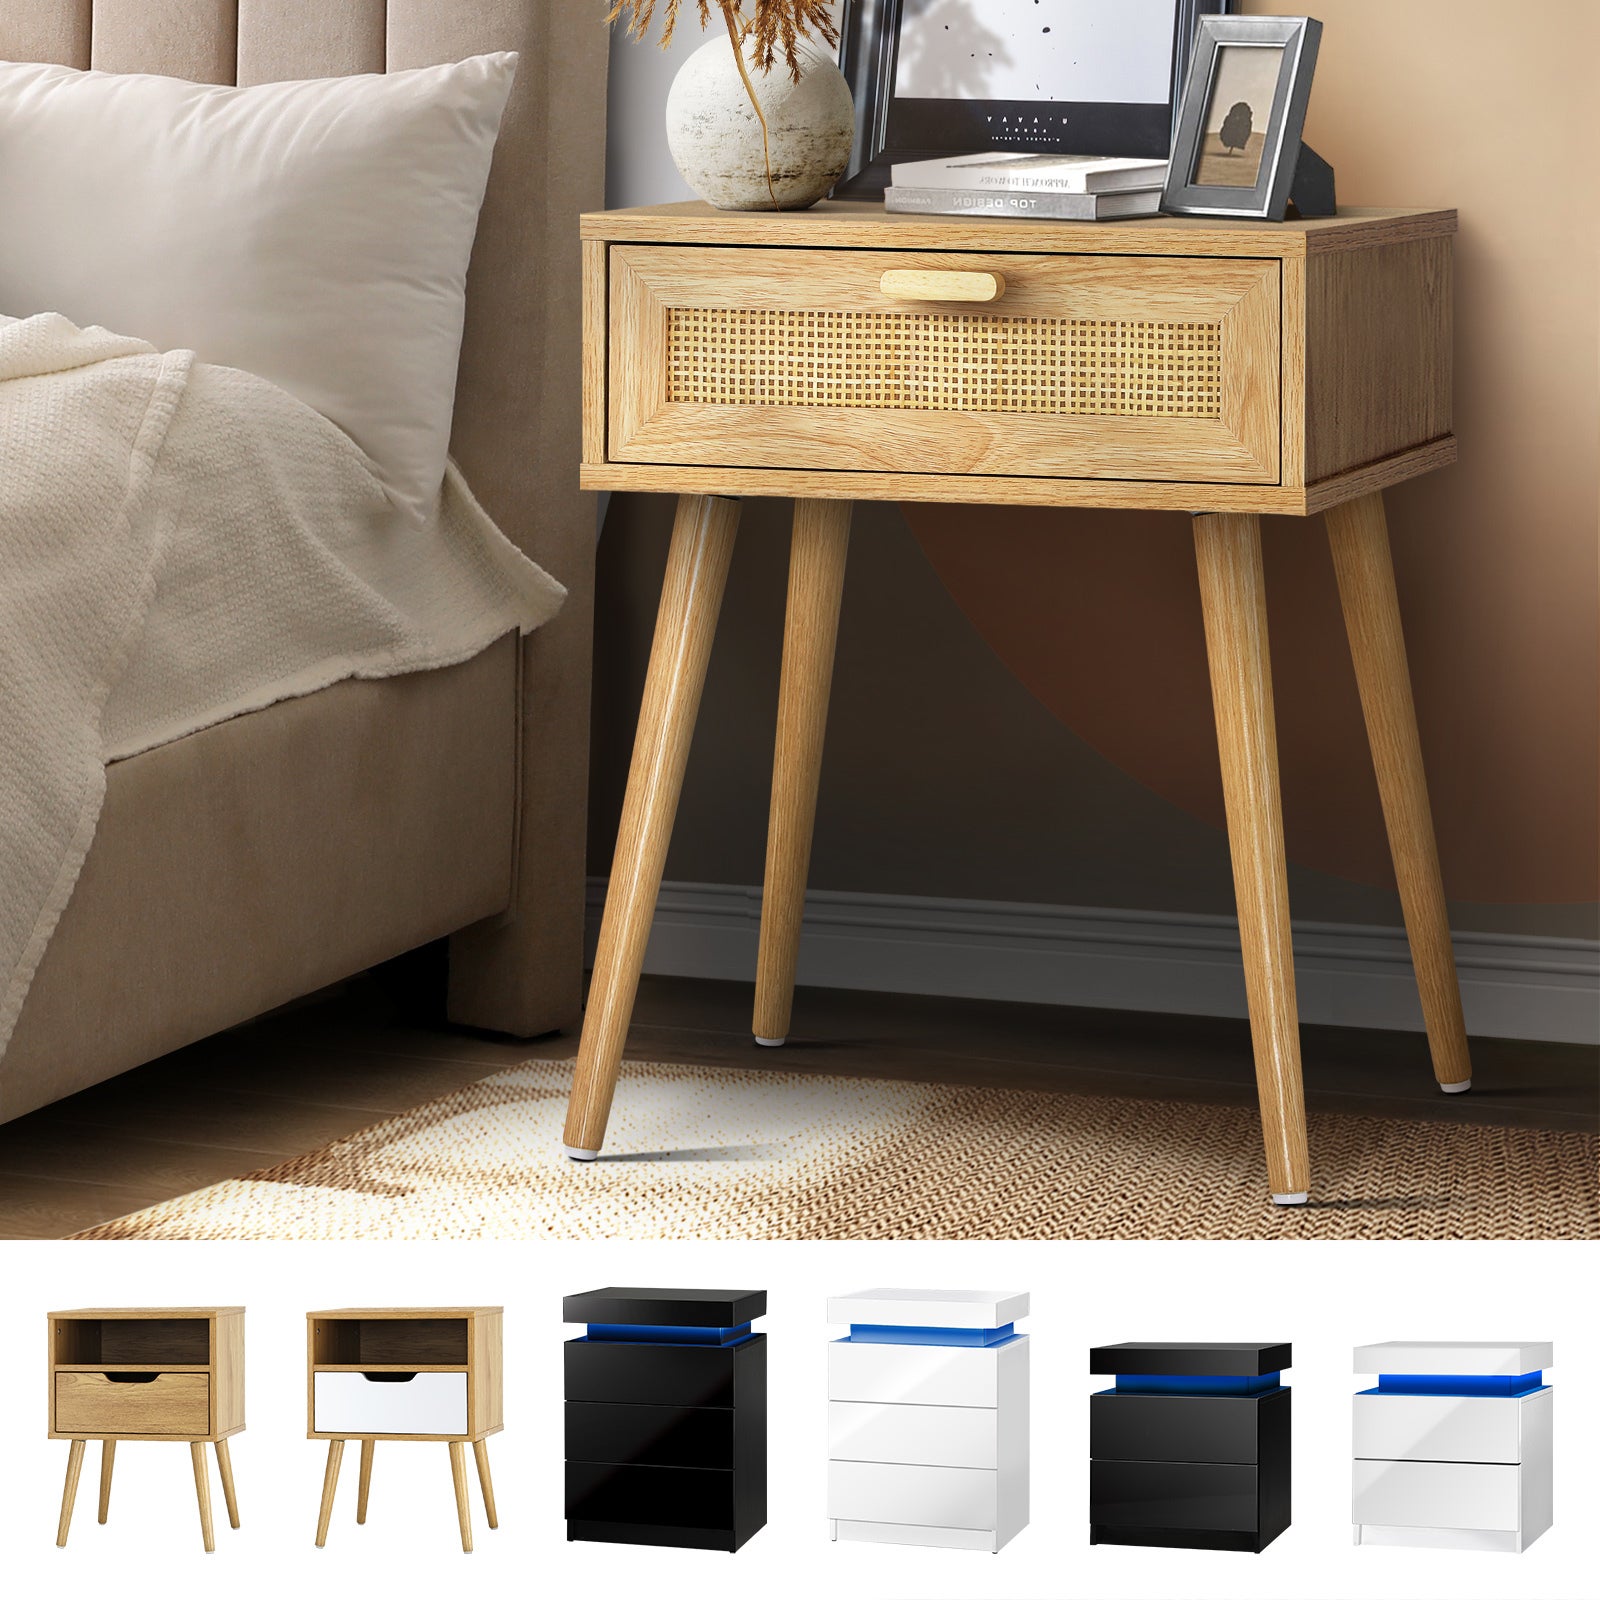 Oikiture Bedside Table Drawers Side Table Storage Cabinet Bedroom Nightstand